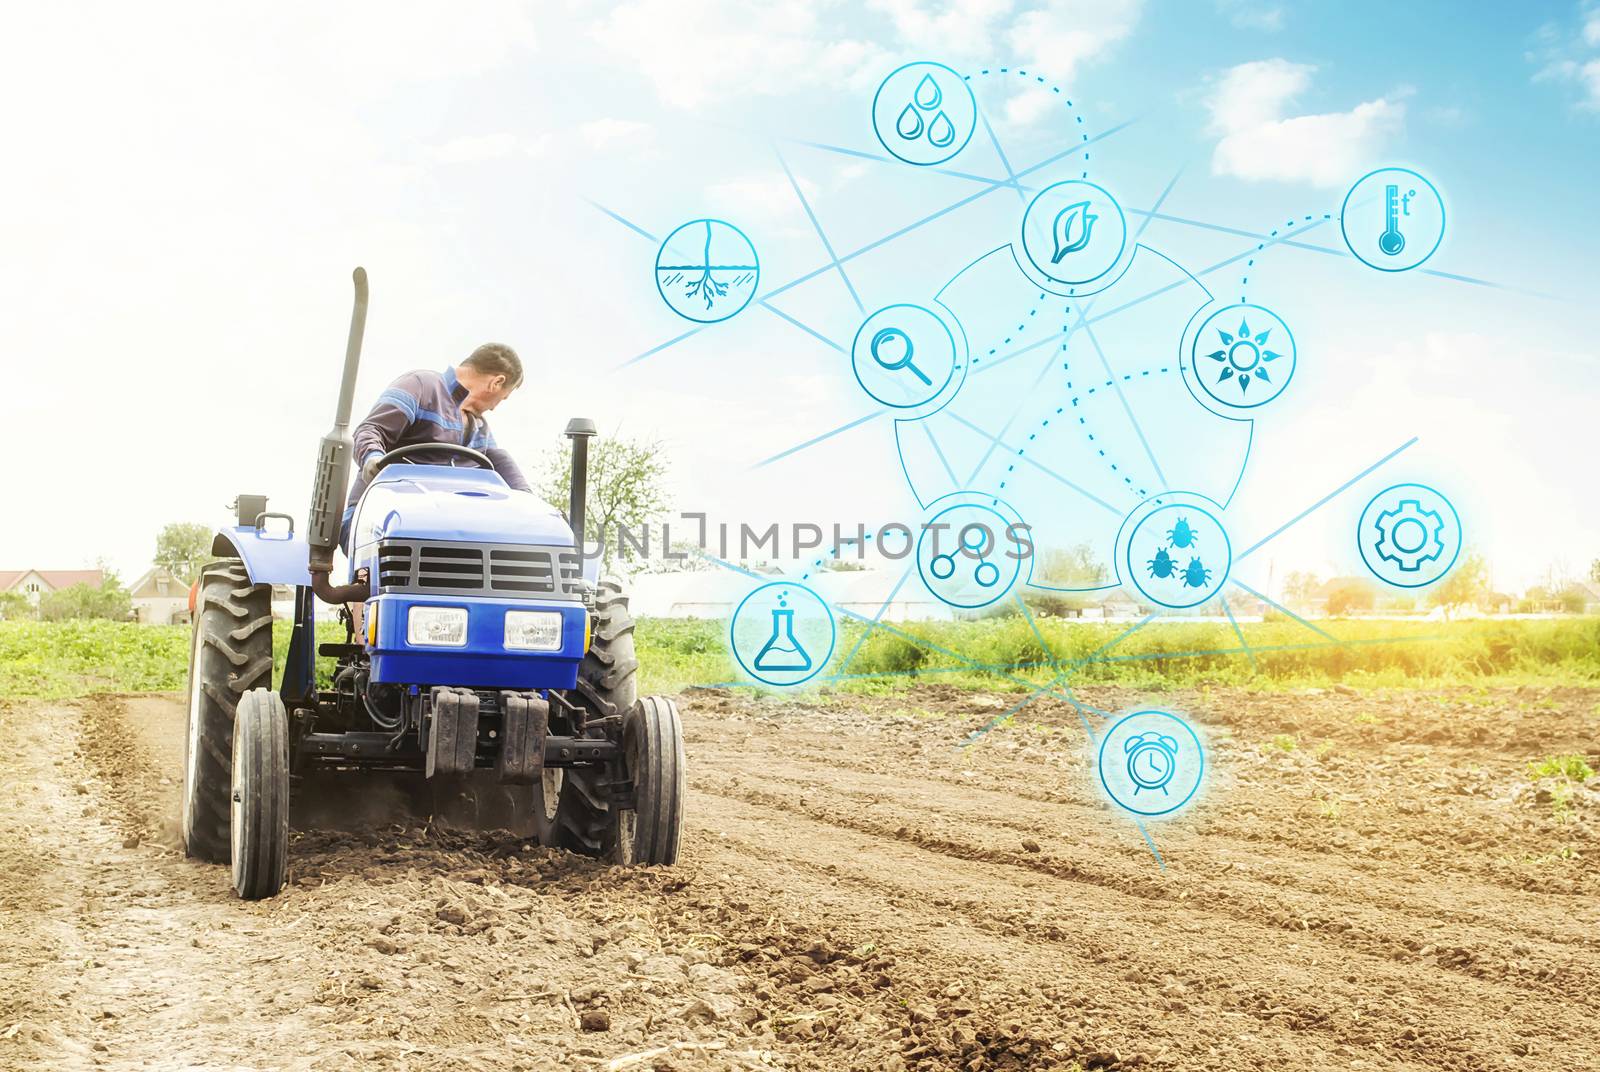 Futuristic innovative technology pictogram and a farmer on a tractor. Science of agronomy. Technology Improvement in quality and yield growth. Farming and agriculture startups. Improving efficiency by iLixe48